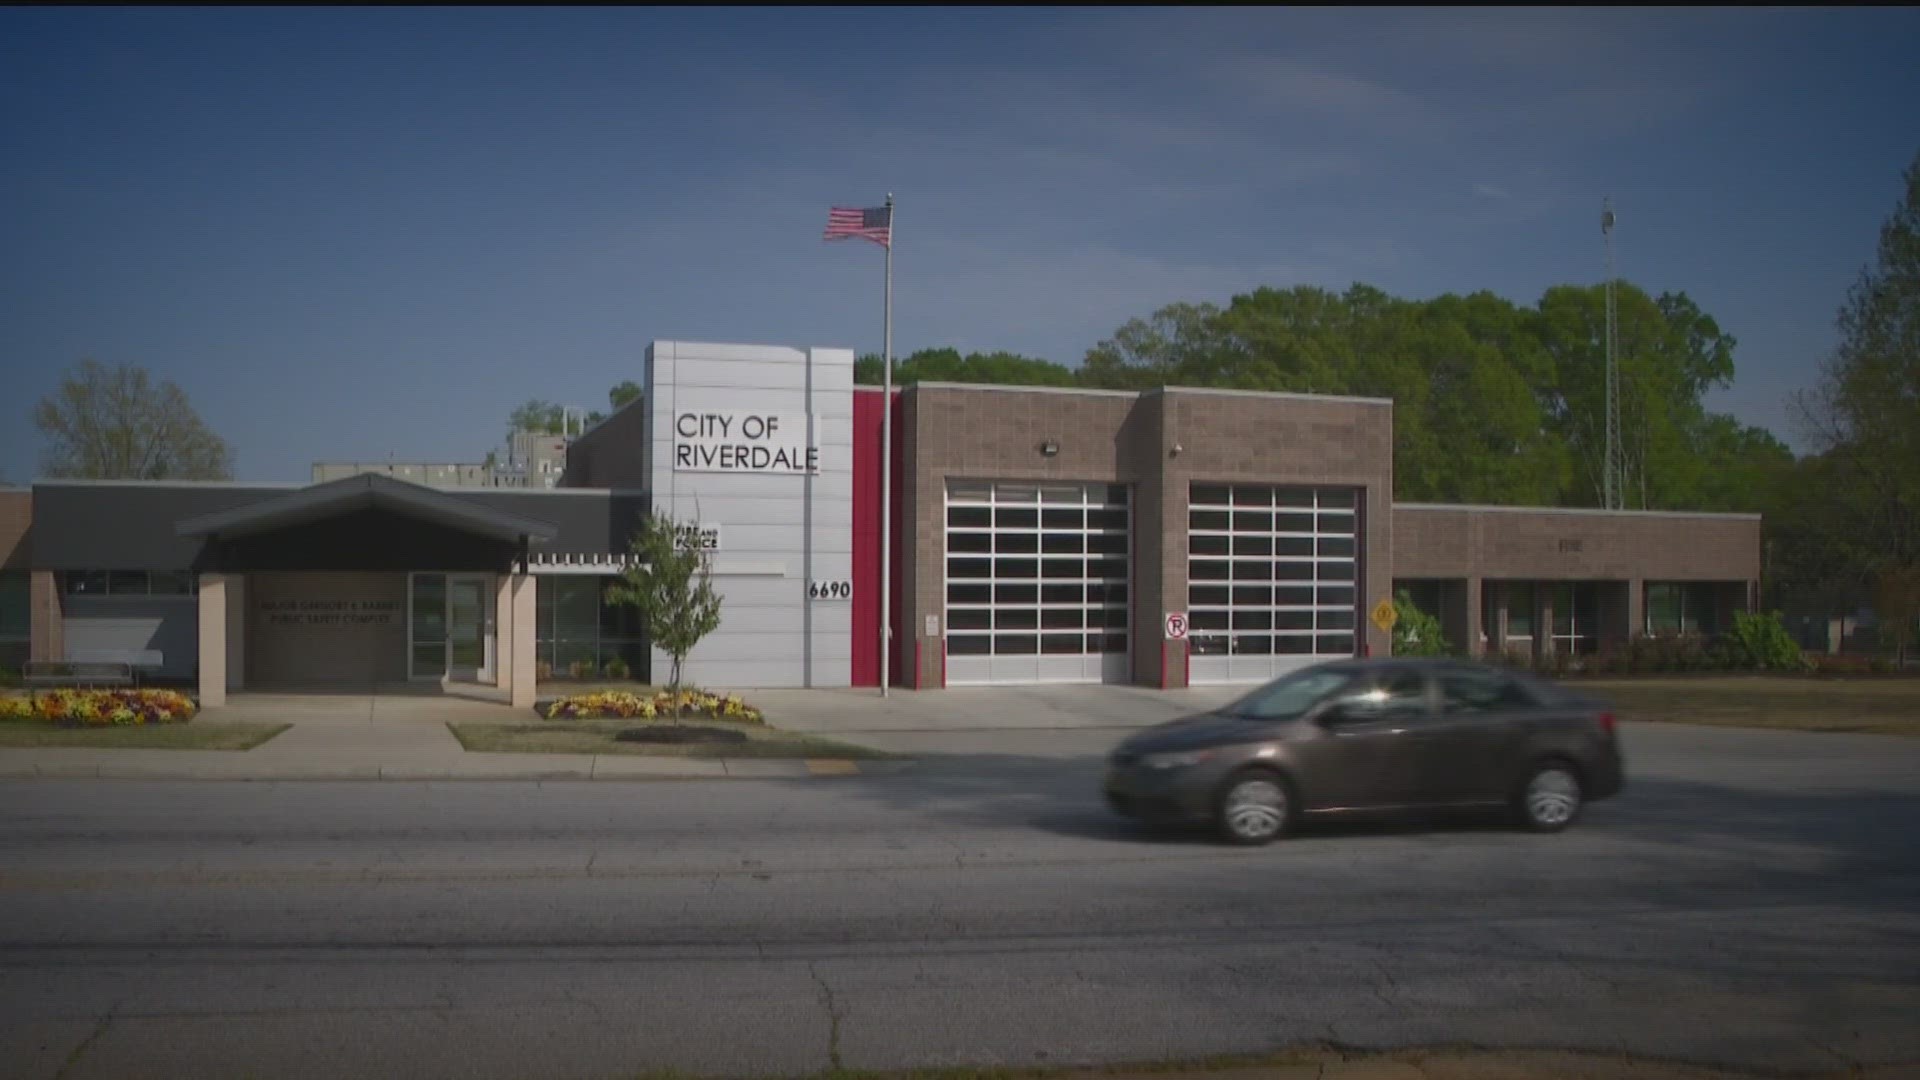 The fight over the fire department in Riverdale got tabled by the Clayton County Board of Commission Tuesday night.